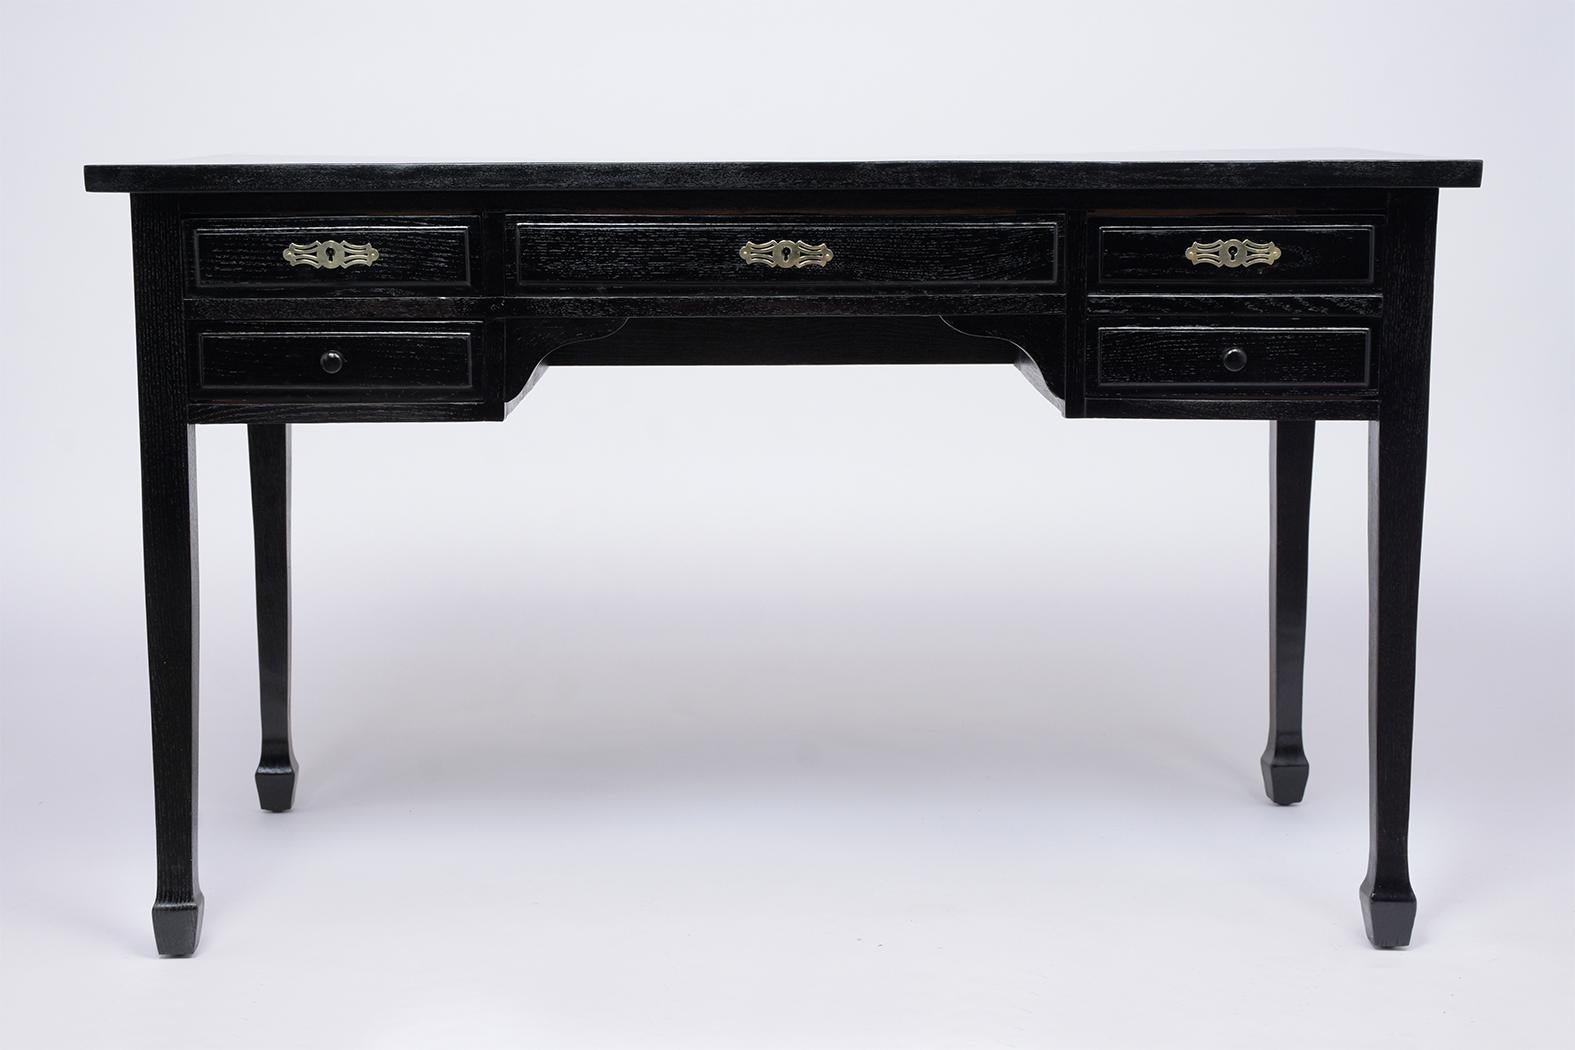 This French Louis XVI style desk circa 1880s is in good condition, made out of oak wood and has a newly ebonized lacquered finish. The desk also comes with two small side drawers on the left side, a large center drawer, and a deep file drawer on the